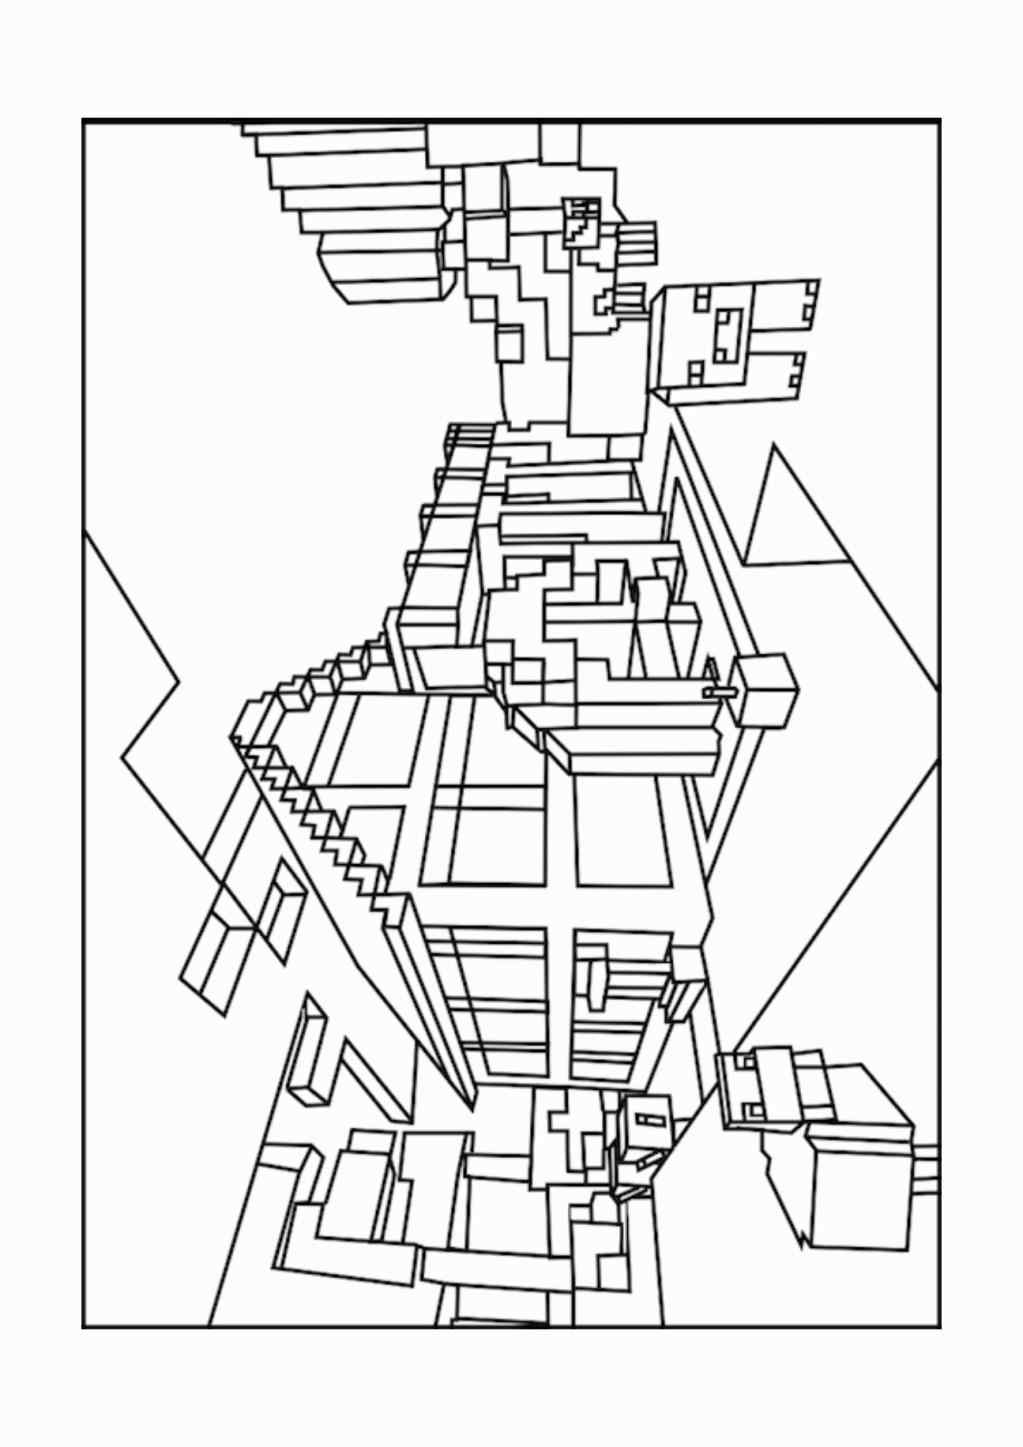 wither minecraft coloring pages